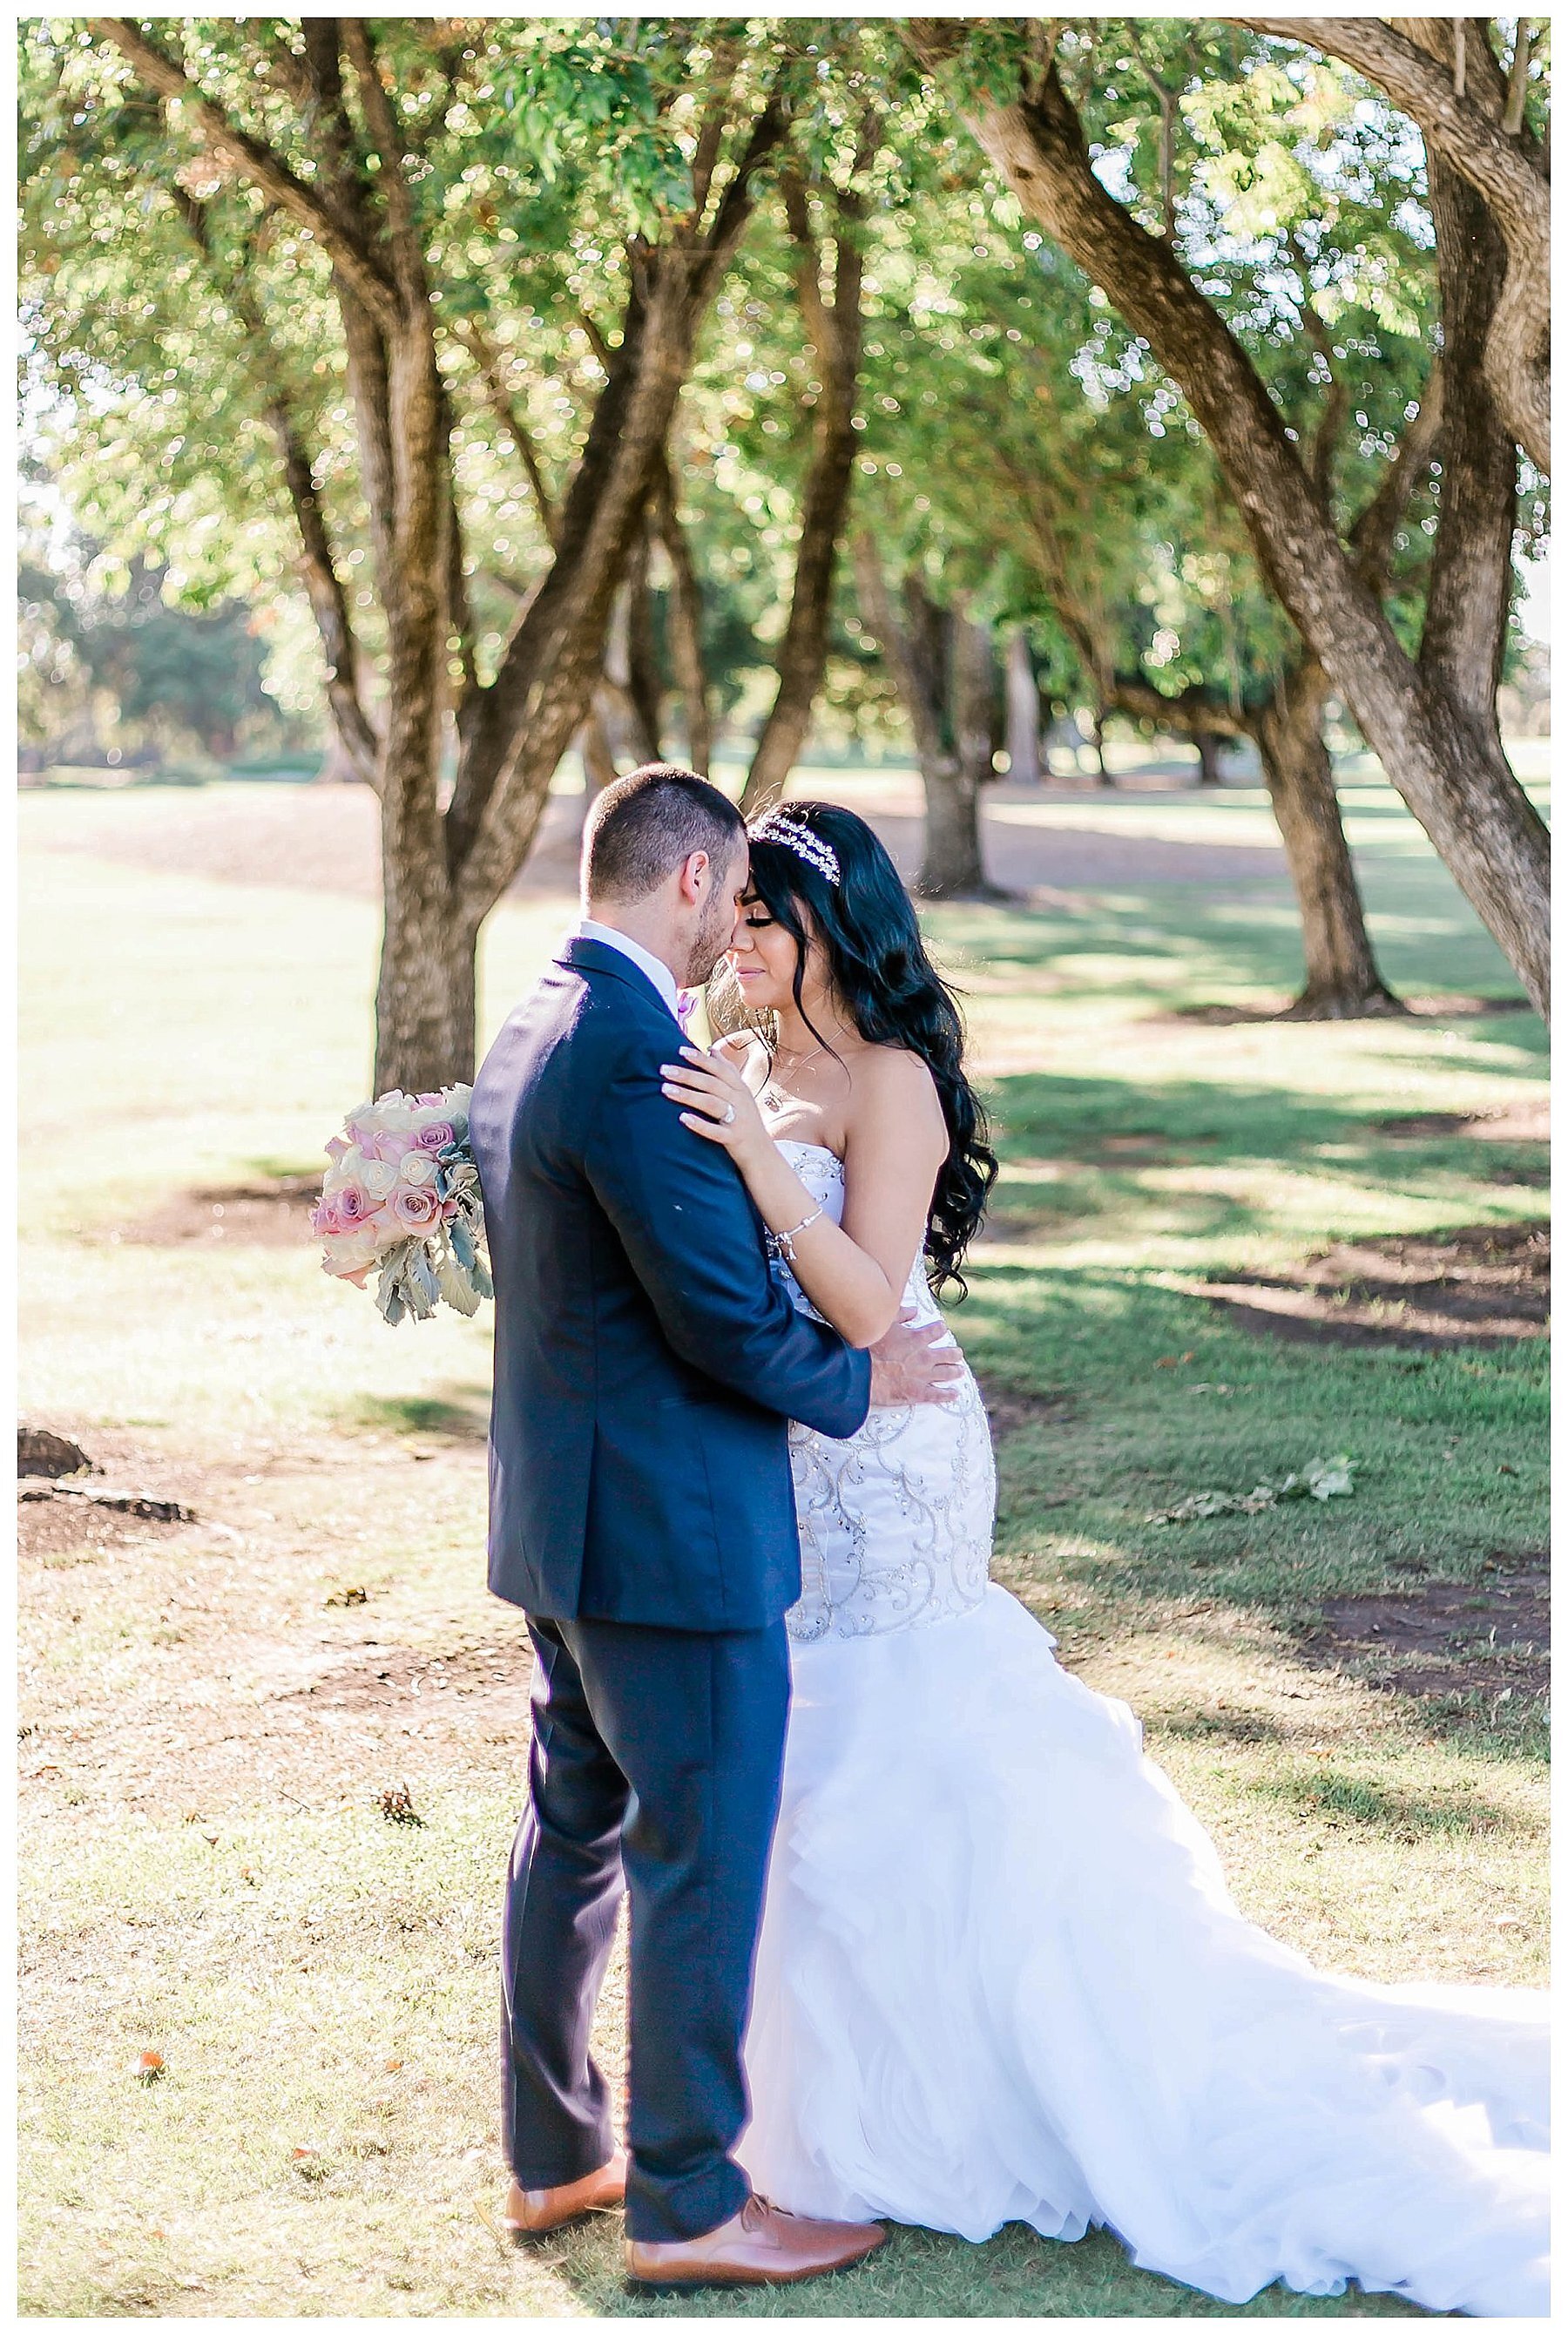  bride and groom touch foreheads in front of the trees 